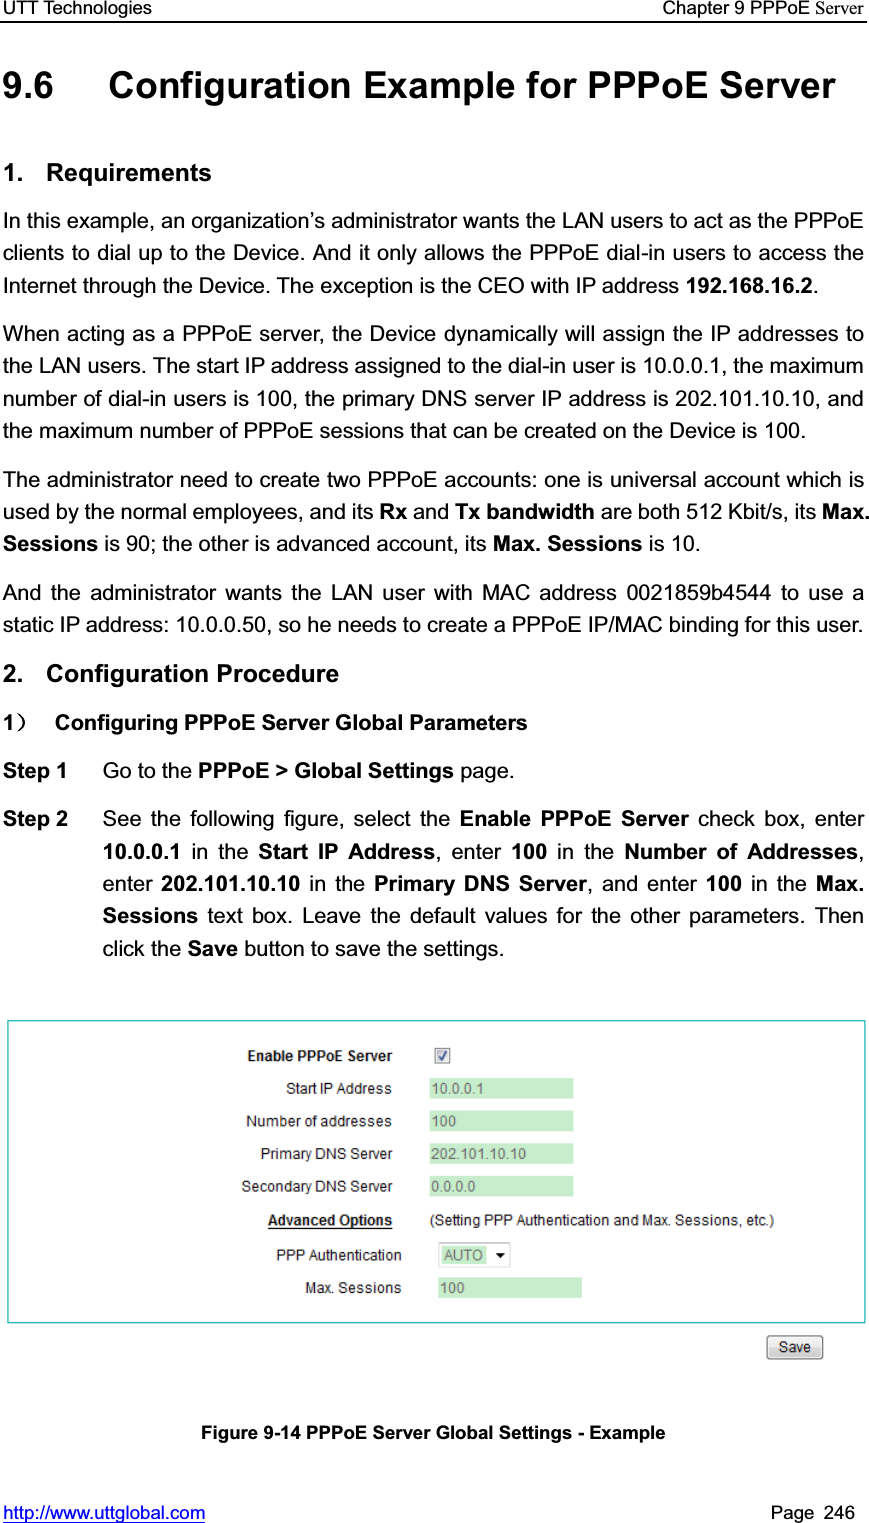 UTT Technologies    Chapter 9 PPPoE Serverhttp://www.uttglobal.com Page 246 9.6  Configuration Example for PPPoE Server 1. Requirements In this example, an organization¶s administrator wants the LAN users to act as the PPPoE clients to dial up to the Device. And it only allows the PPPoE dial-in users to access the Internet through the Device. The exception is the CEO with IP address 192.168.16.2.When acting as a PPPoE server, the Device dynamically will assign the IP addresses to the LAN users. The start IP address assigned to the dial-in user is 10.0.0.1, the maximum number of dial-in users is 100, the primary DNS server IP address is 202.101.10.10, and the maximum number of PPPoE sessions that can be created on the Device is 100. The administrator need to create two PPPoE accounts: one is universal account which is used by the normal employees, and its Rx and Tx bandwidth are both 512 Kbit/s, its Max. Sessions is 90; the other is advanced account, its Max. Sessions is 10. And the administrator wants the LAN user with MAC address 0021859b4544 to use a static IP address: 10.0.0.50, so he needs to create a PPPoE IP/MAC binding for this user. 2. Configuration Procedure 1˅  Configuring PPPoE Server Global Parameters Step 1  Go to the PPPoE &gt; Global Settings page. Step 2  See the following figure, select the Enable PPPoE Server check box, enter 10.0.0.1 in the Start IP Address, enter 100 in the Number of Addresses,enter 202.101.10.10 in the Primary DNS Server, and enter 100 in the Max. Sessions text box. Leave the default values for the other parameters. Then click the Save button to save the settings.   Figure 9-14 PPPoE Server Global Settings - Example 